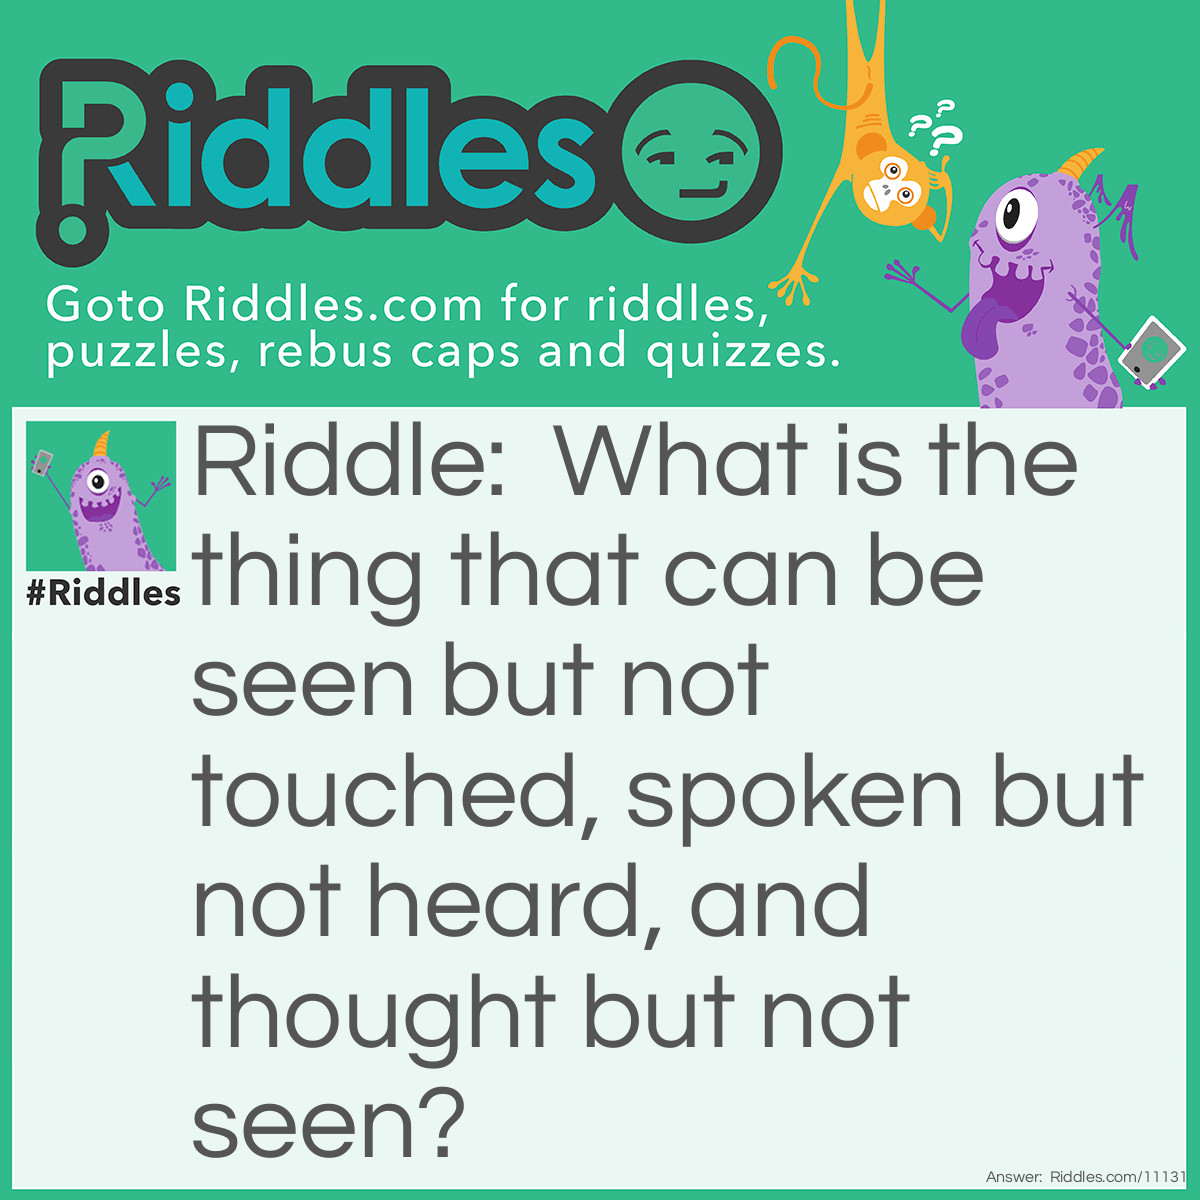 Riddle: What is the thing that can be seen but not touched, spoken but not heard, and thought but not seen? Answer: An idea.